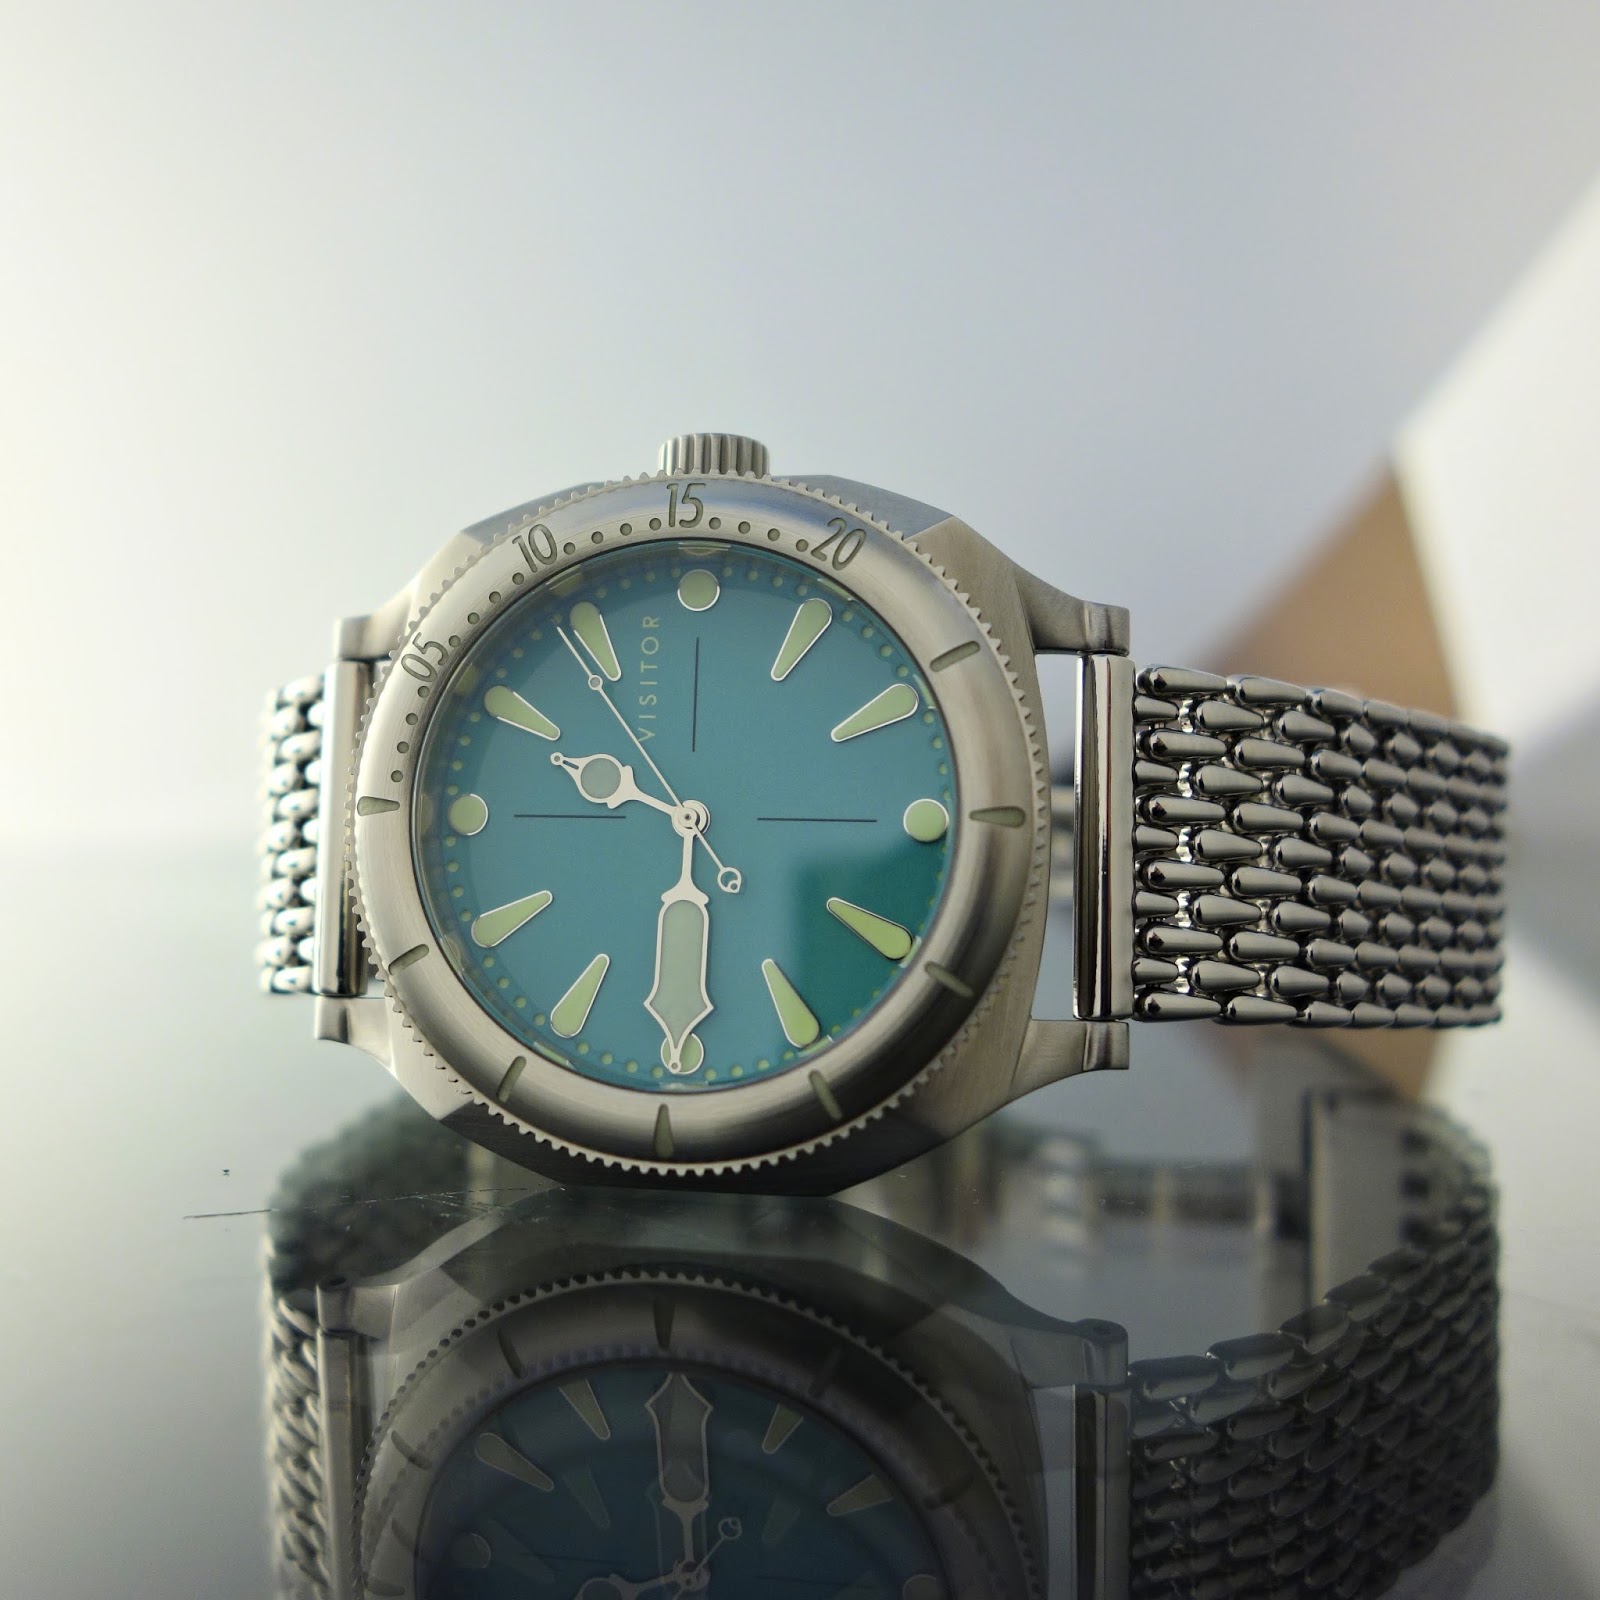 New Visitor Watches, Part 2: The Duneshore Shallows